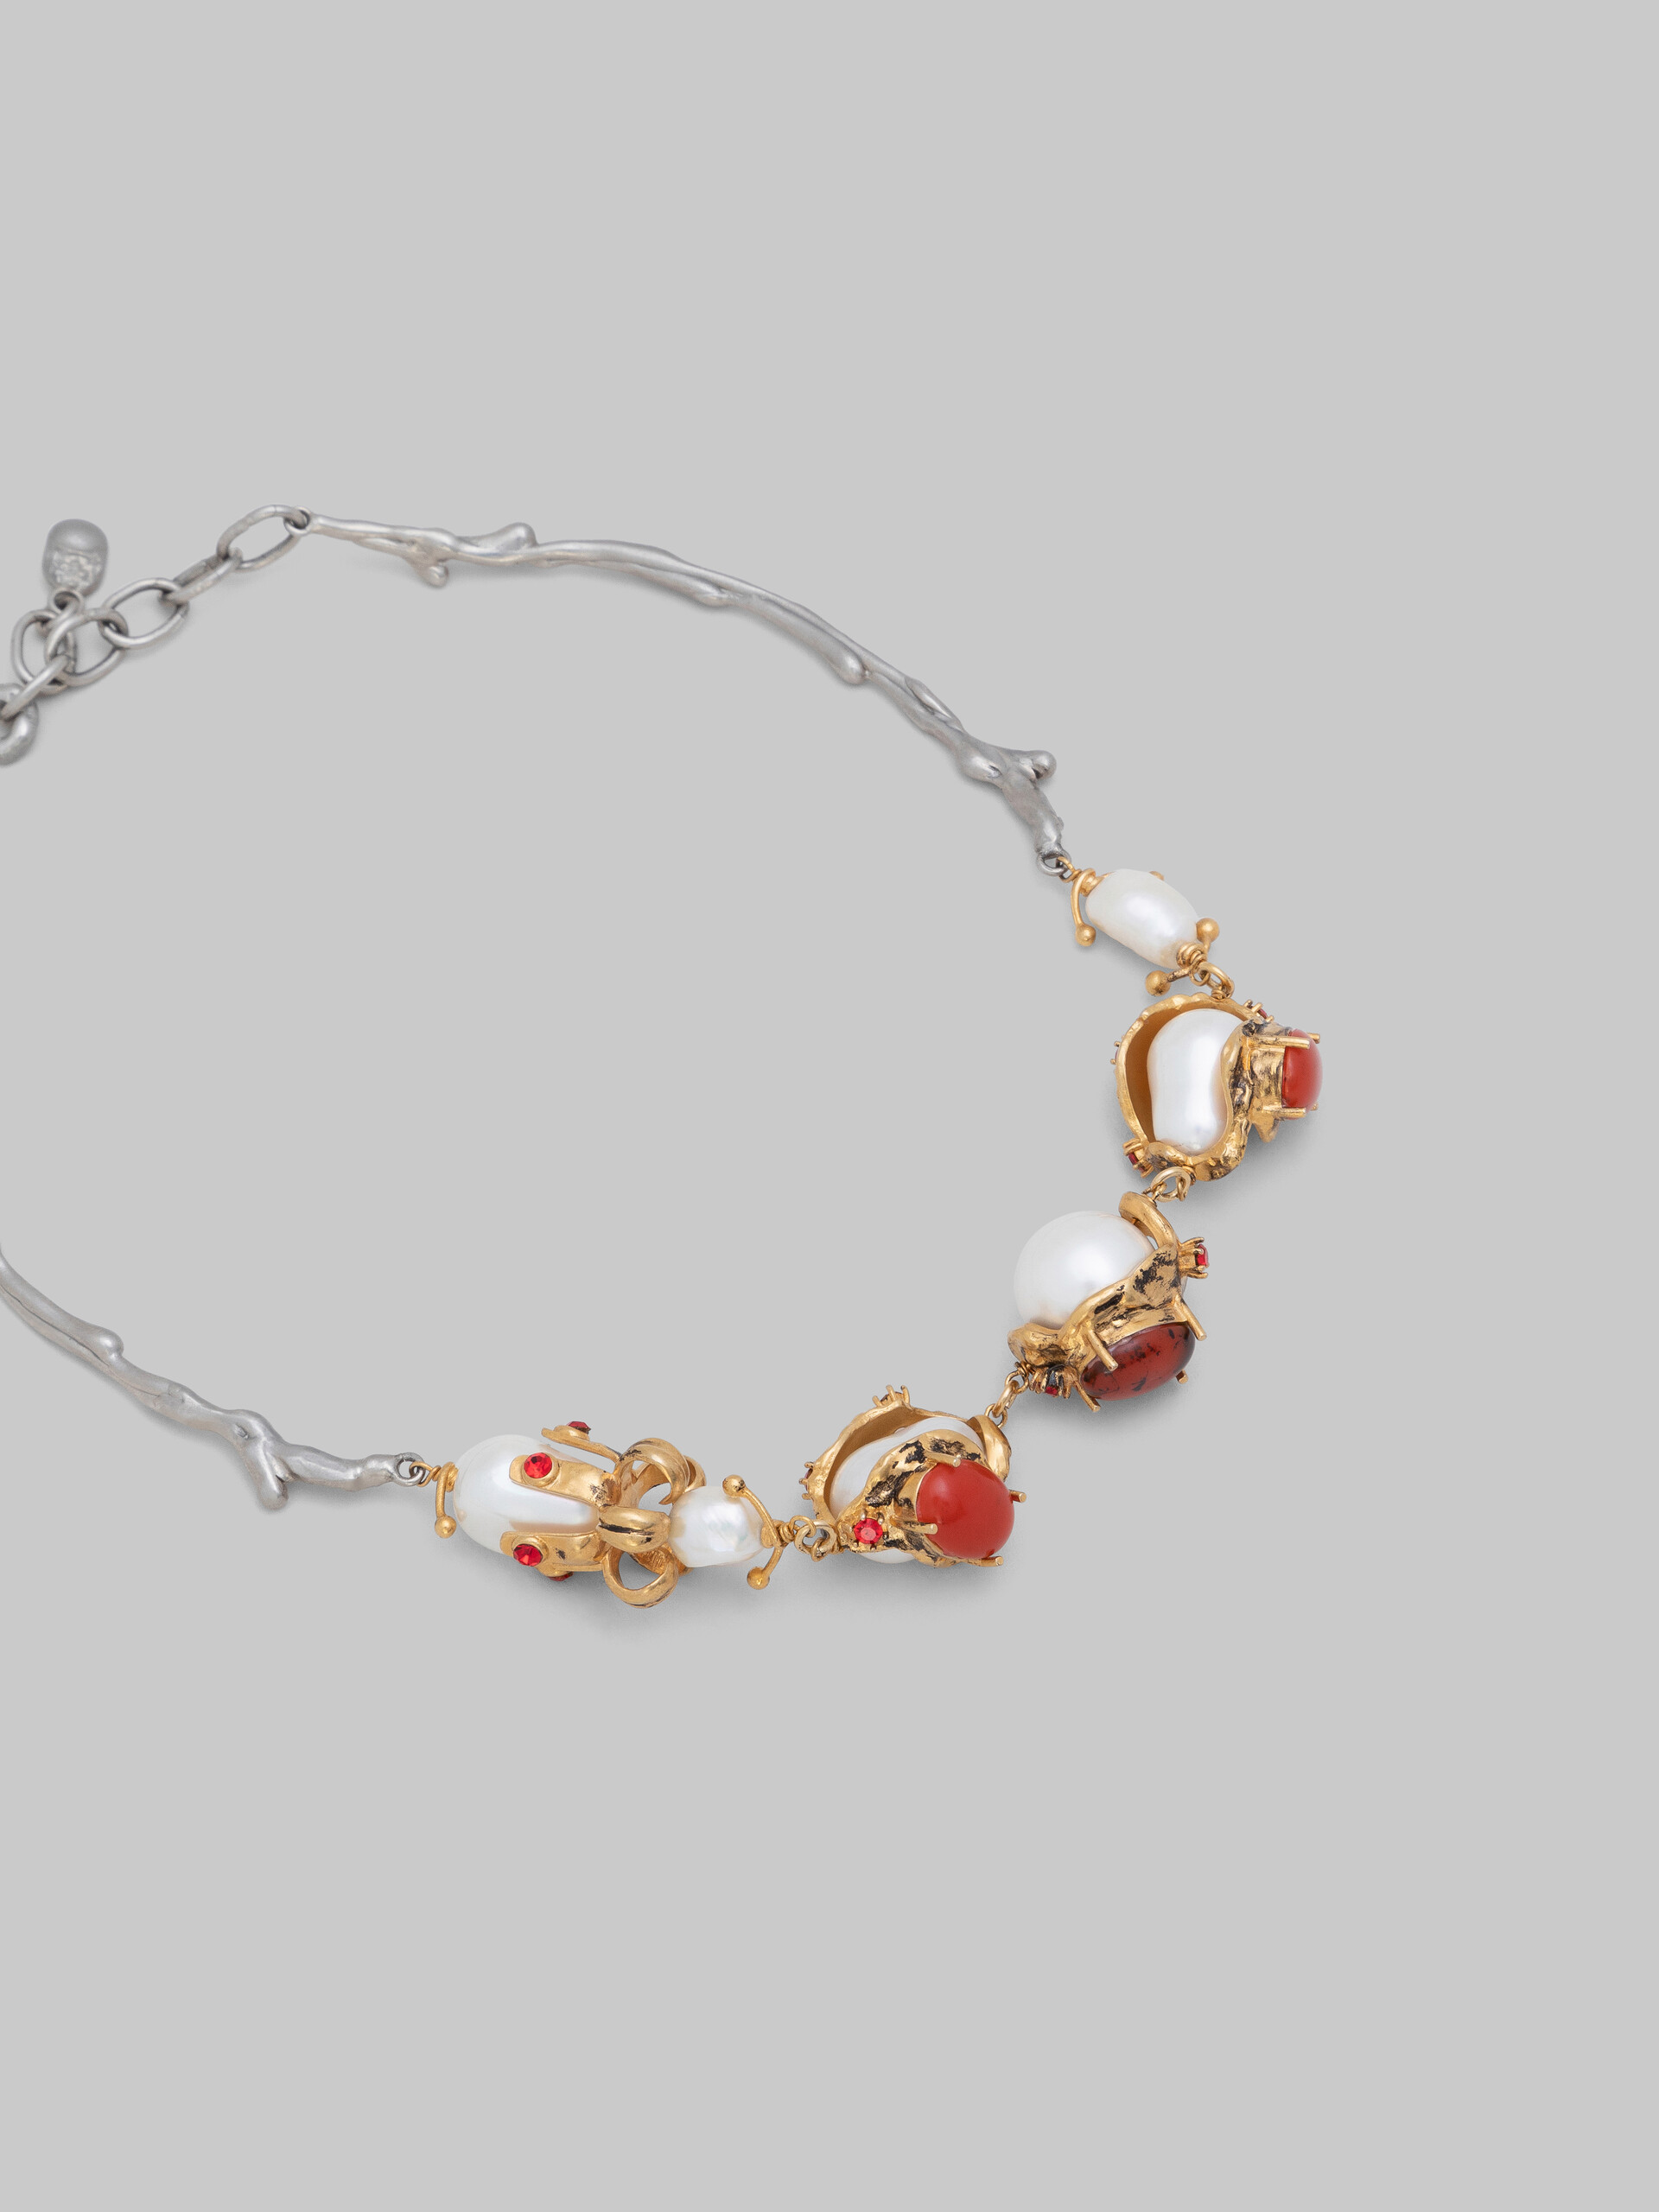 Gold and palladium branch necklace with encased pearl charms - Necklaces - Image 3